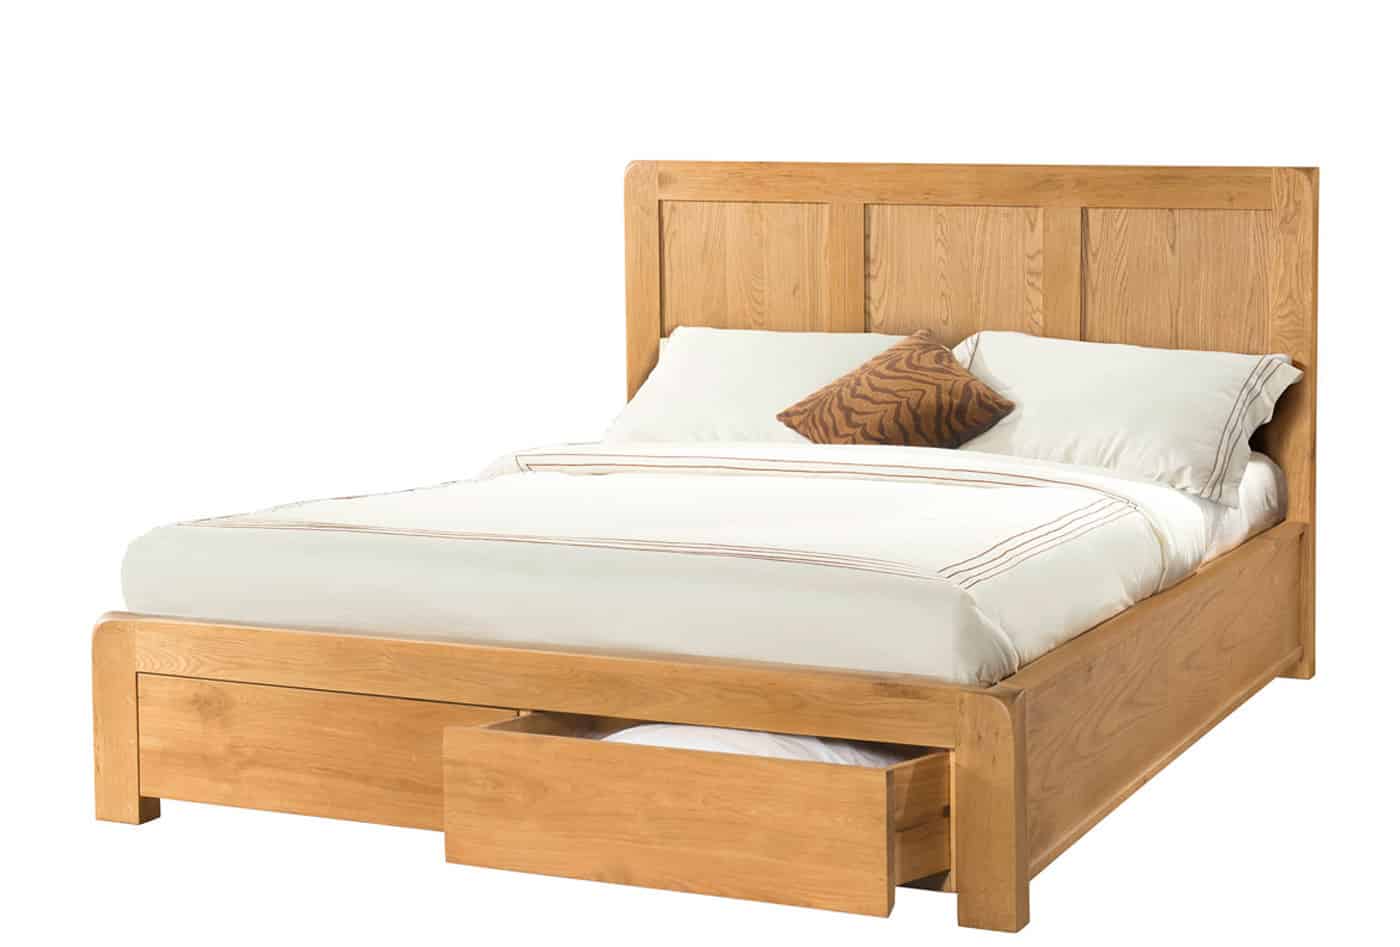 Avon Waxed Oak 5′ King Size Bed with Storage Drawers